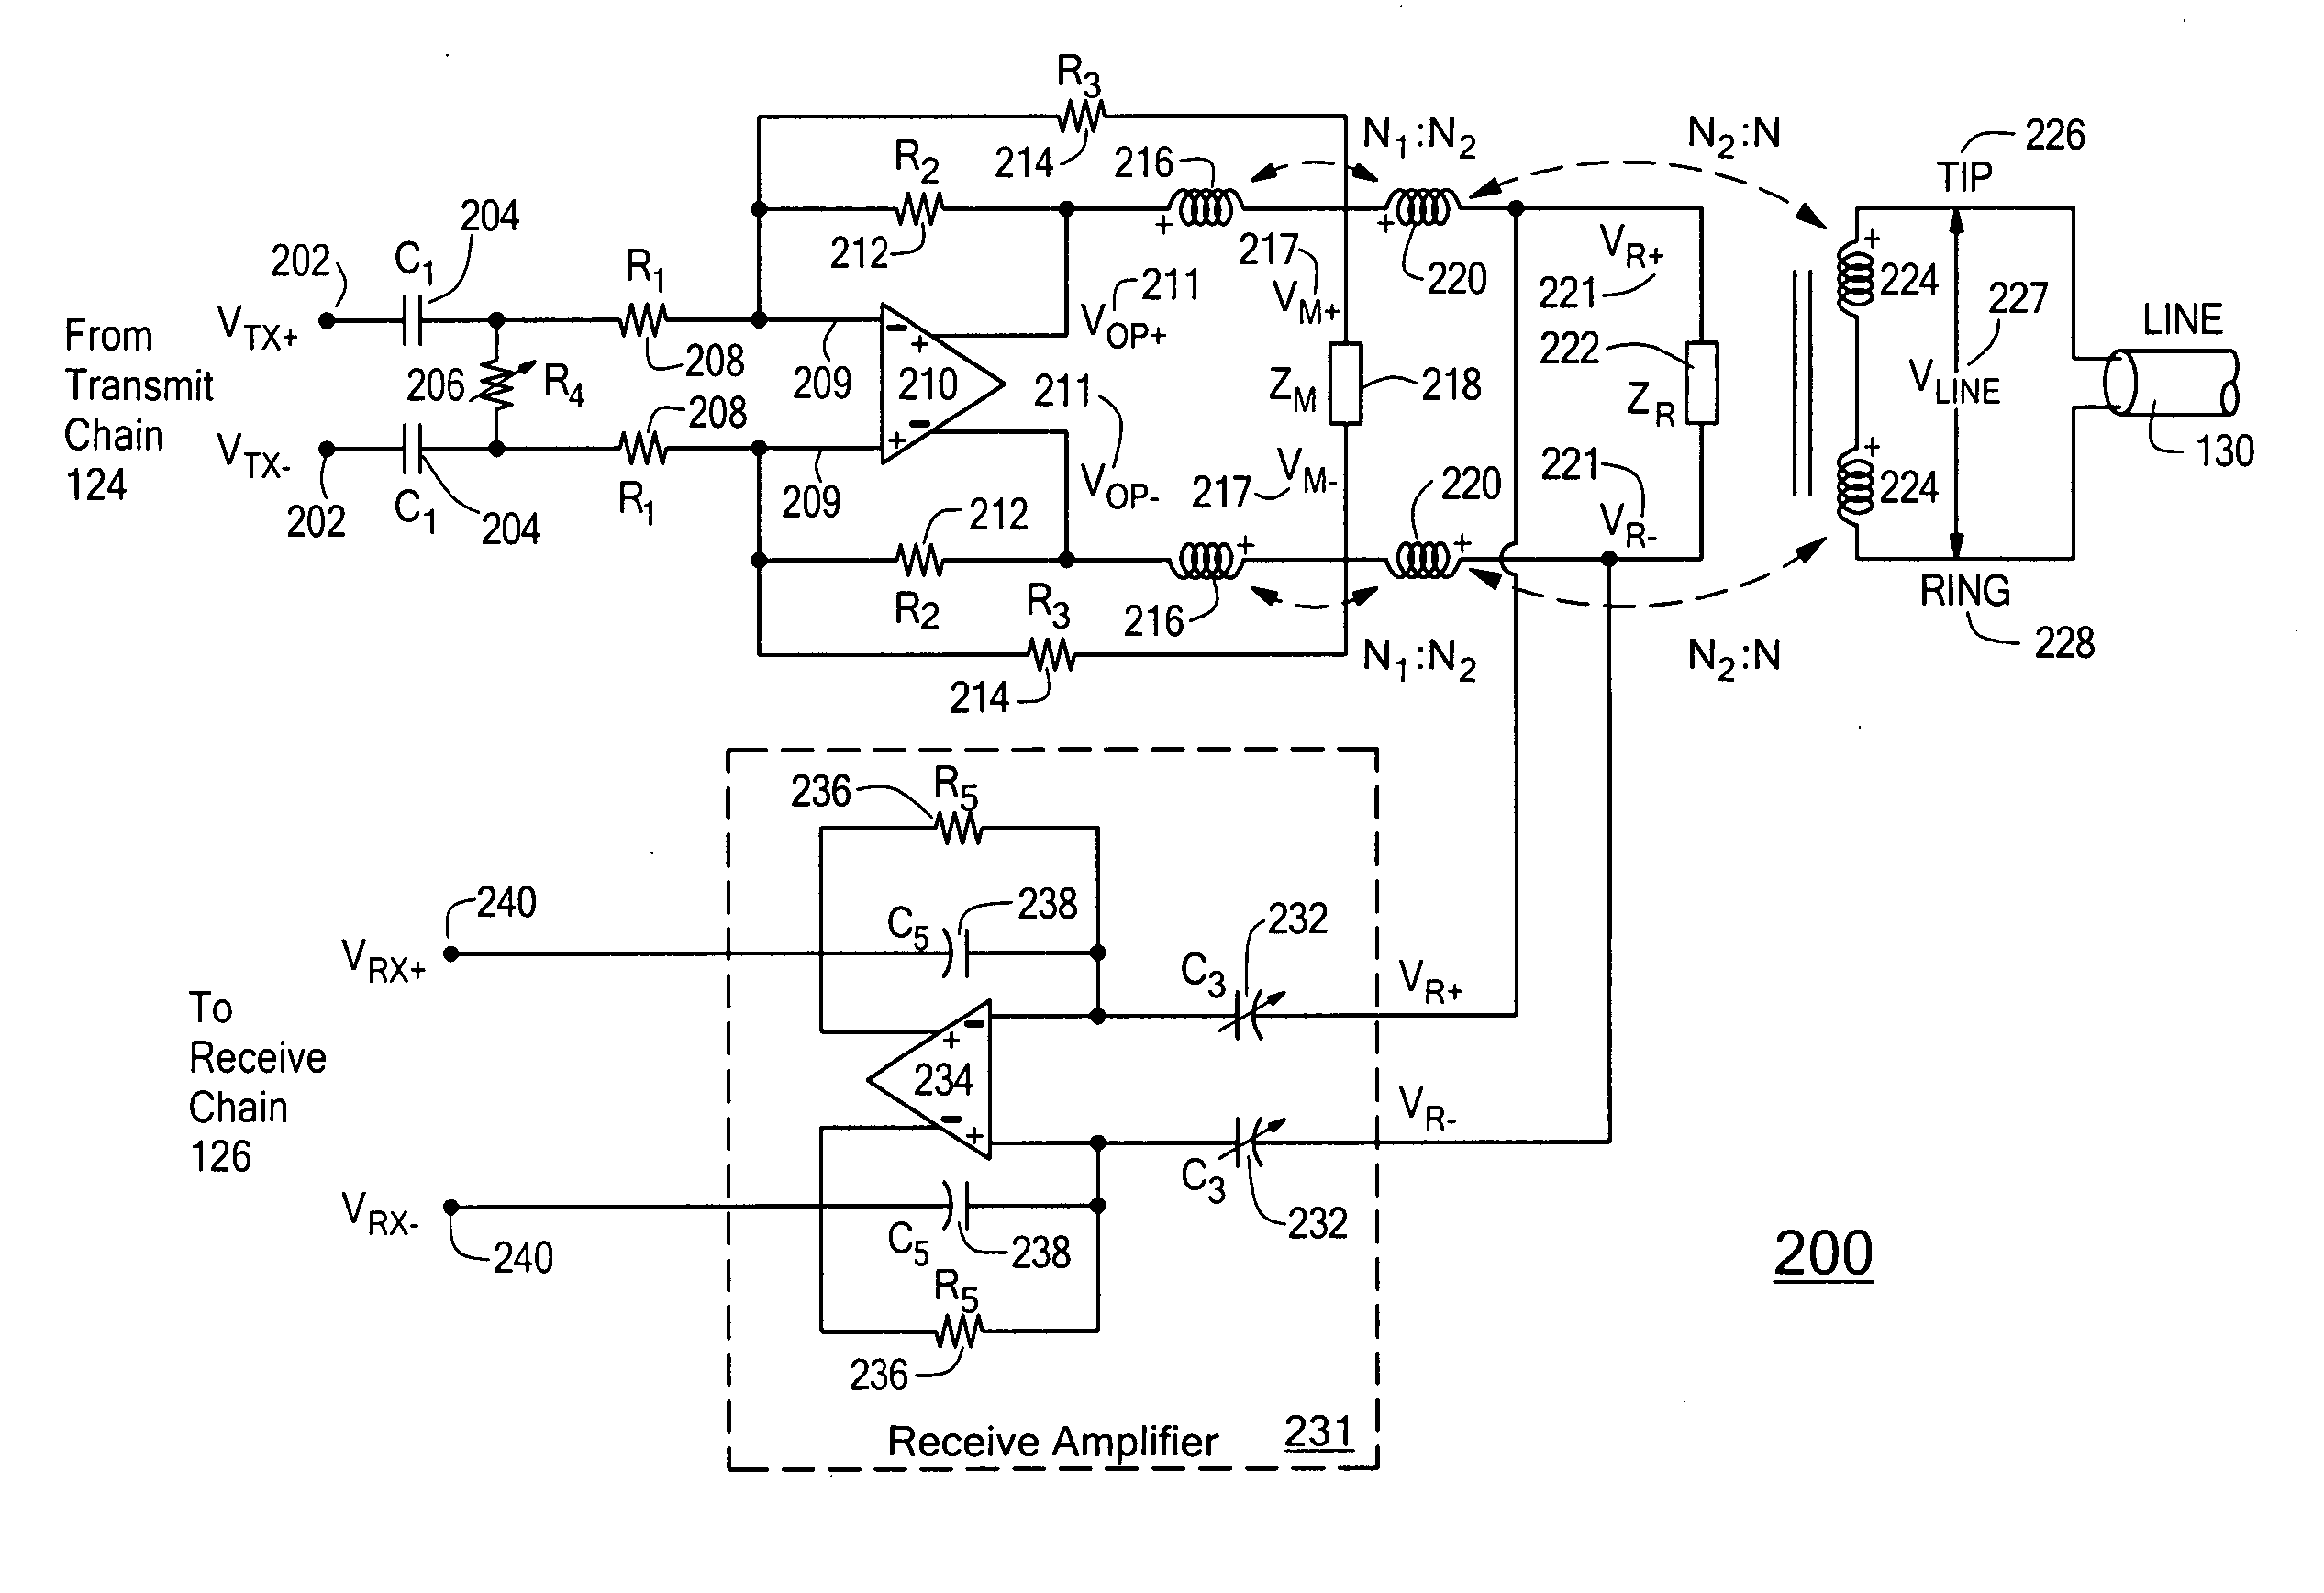 Line interface with analog echo cancellation